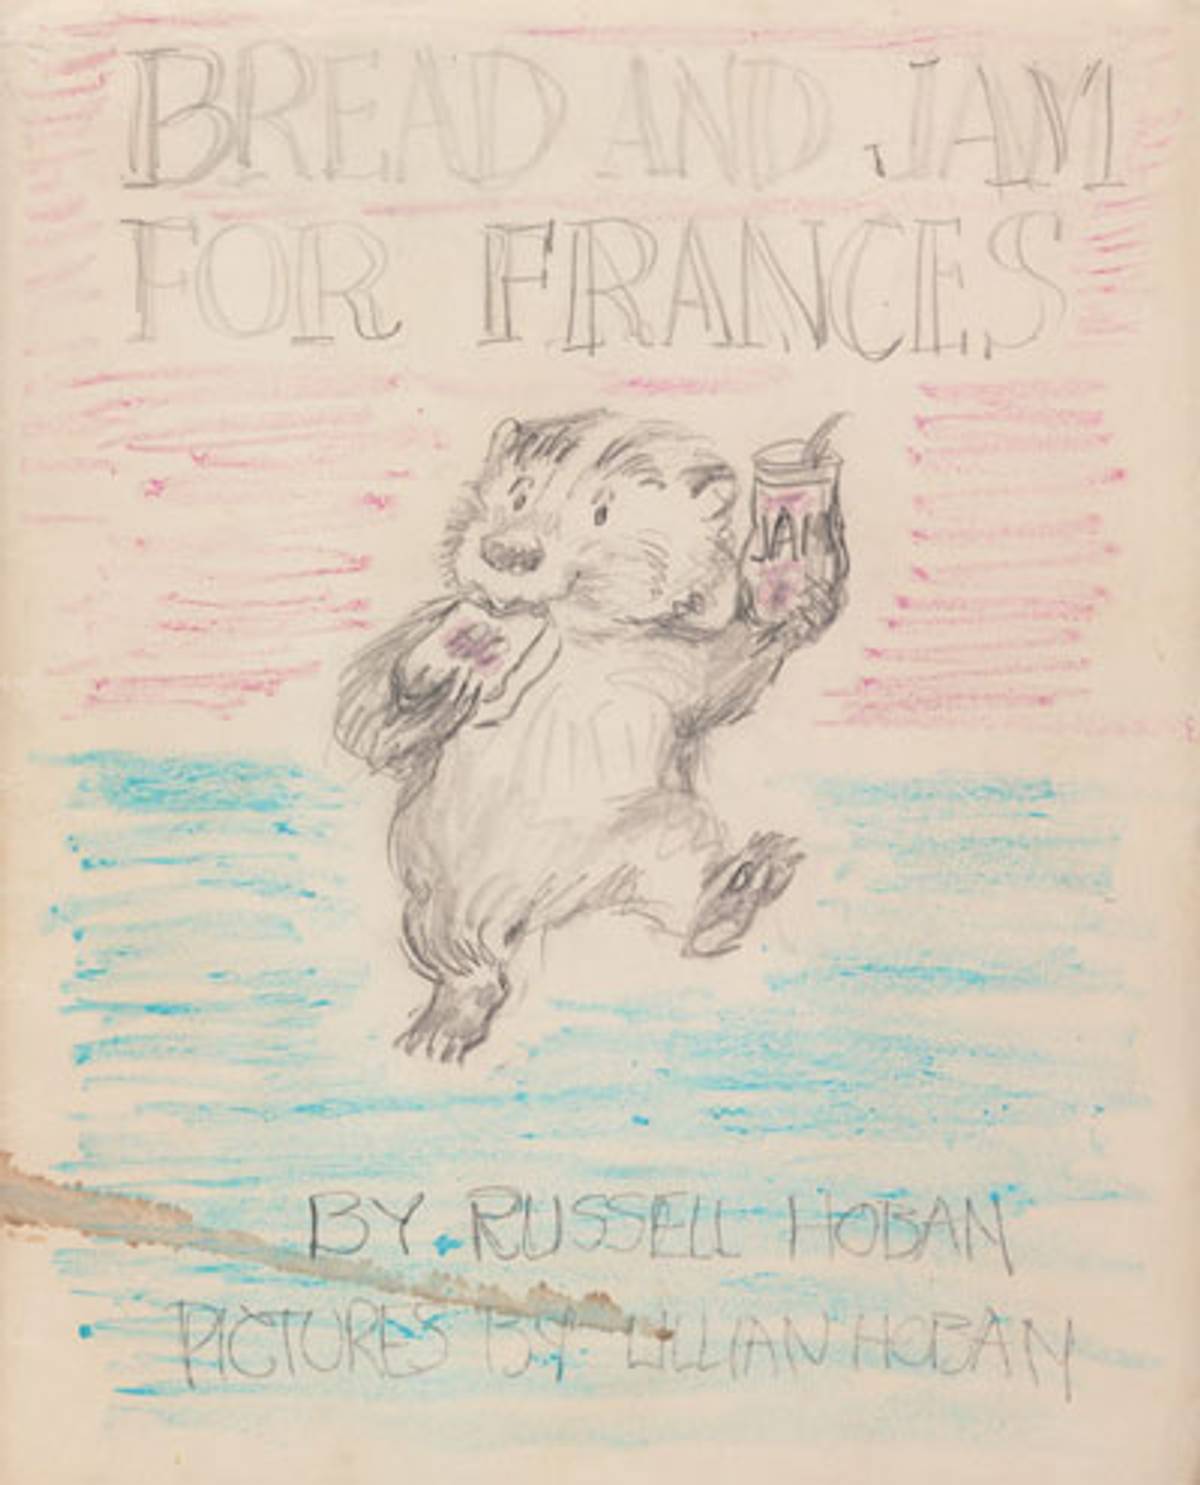 ‘Bread and Jam for Frances’ artist’s dummy cover, by Lillian Hoban, ca. 1964, from the Lillian Hoban Papers.